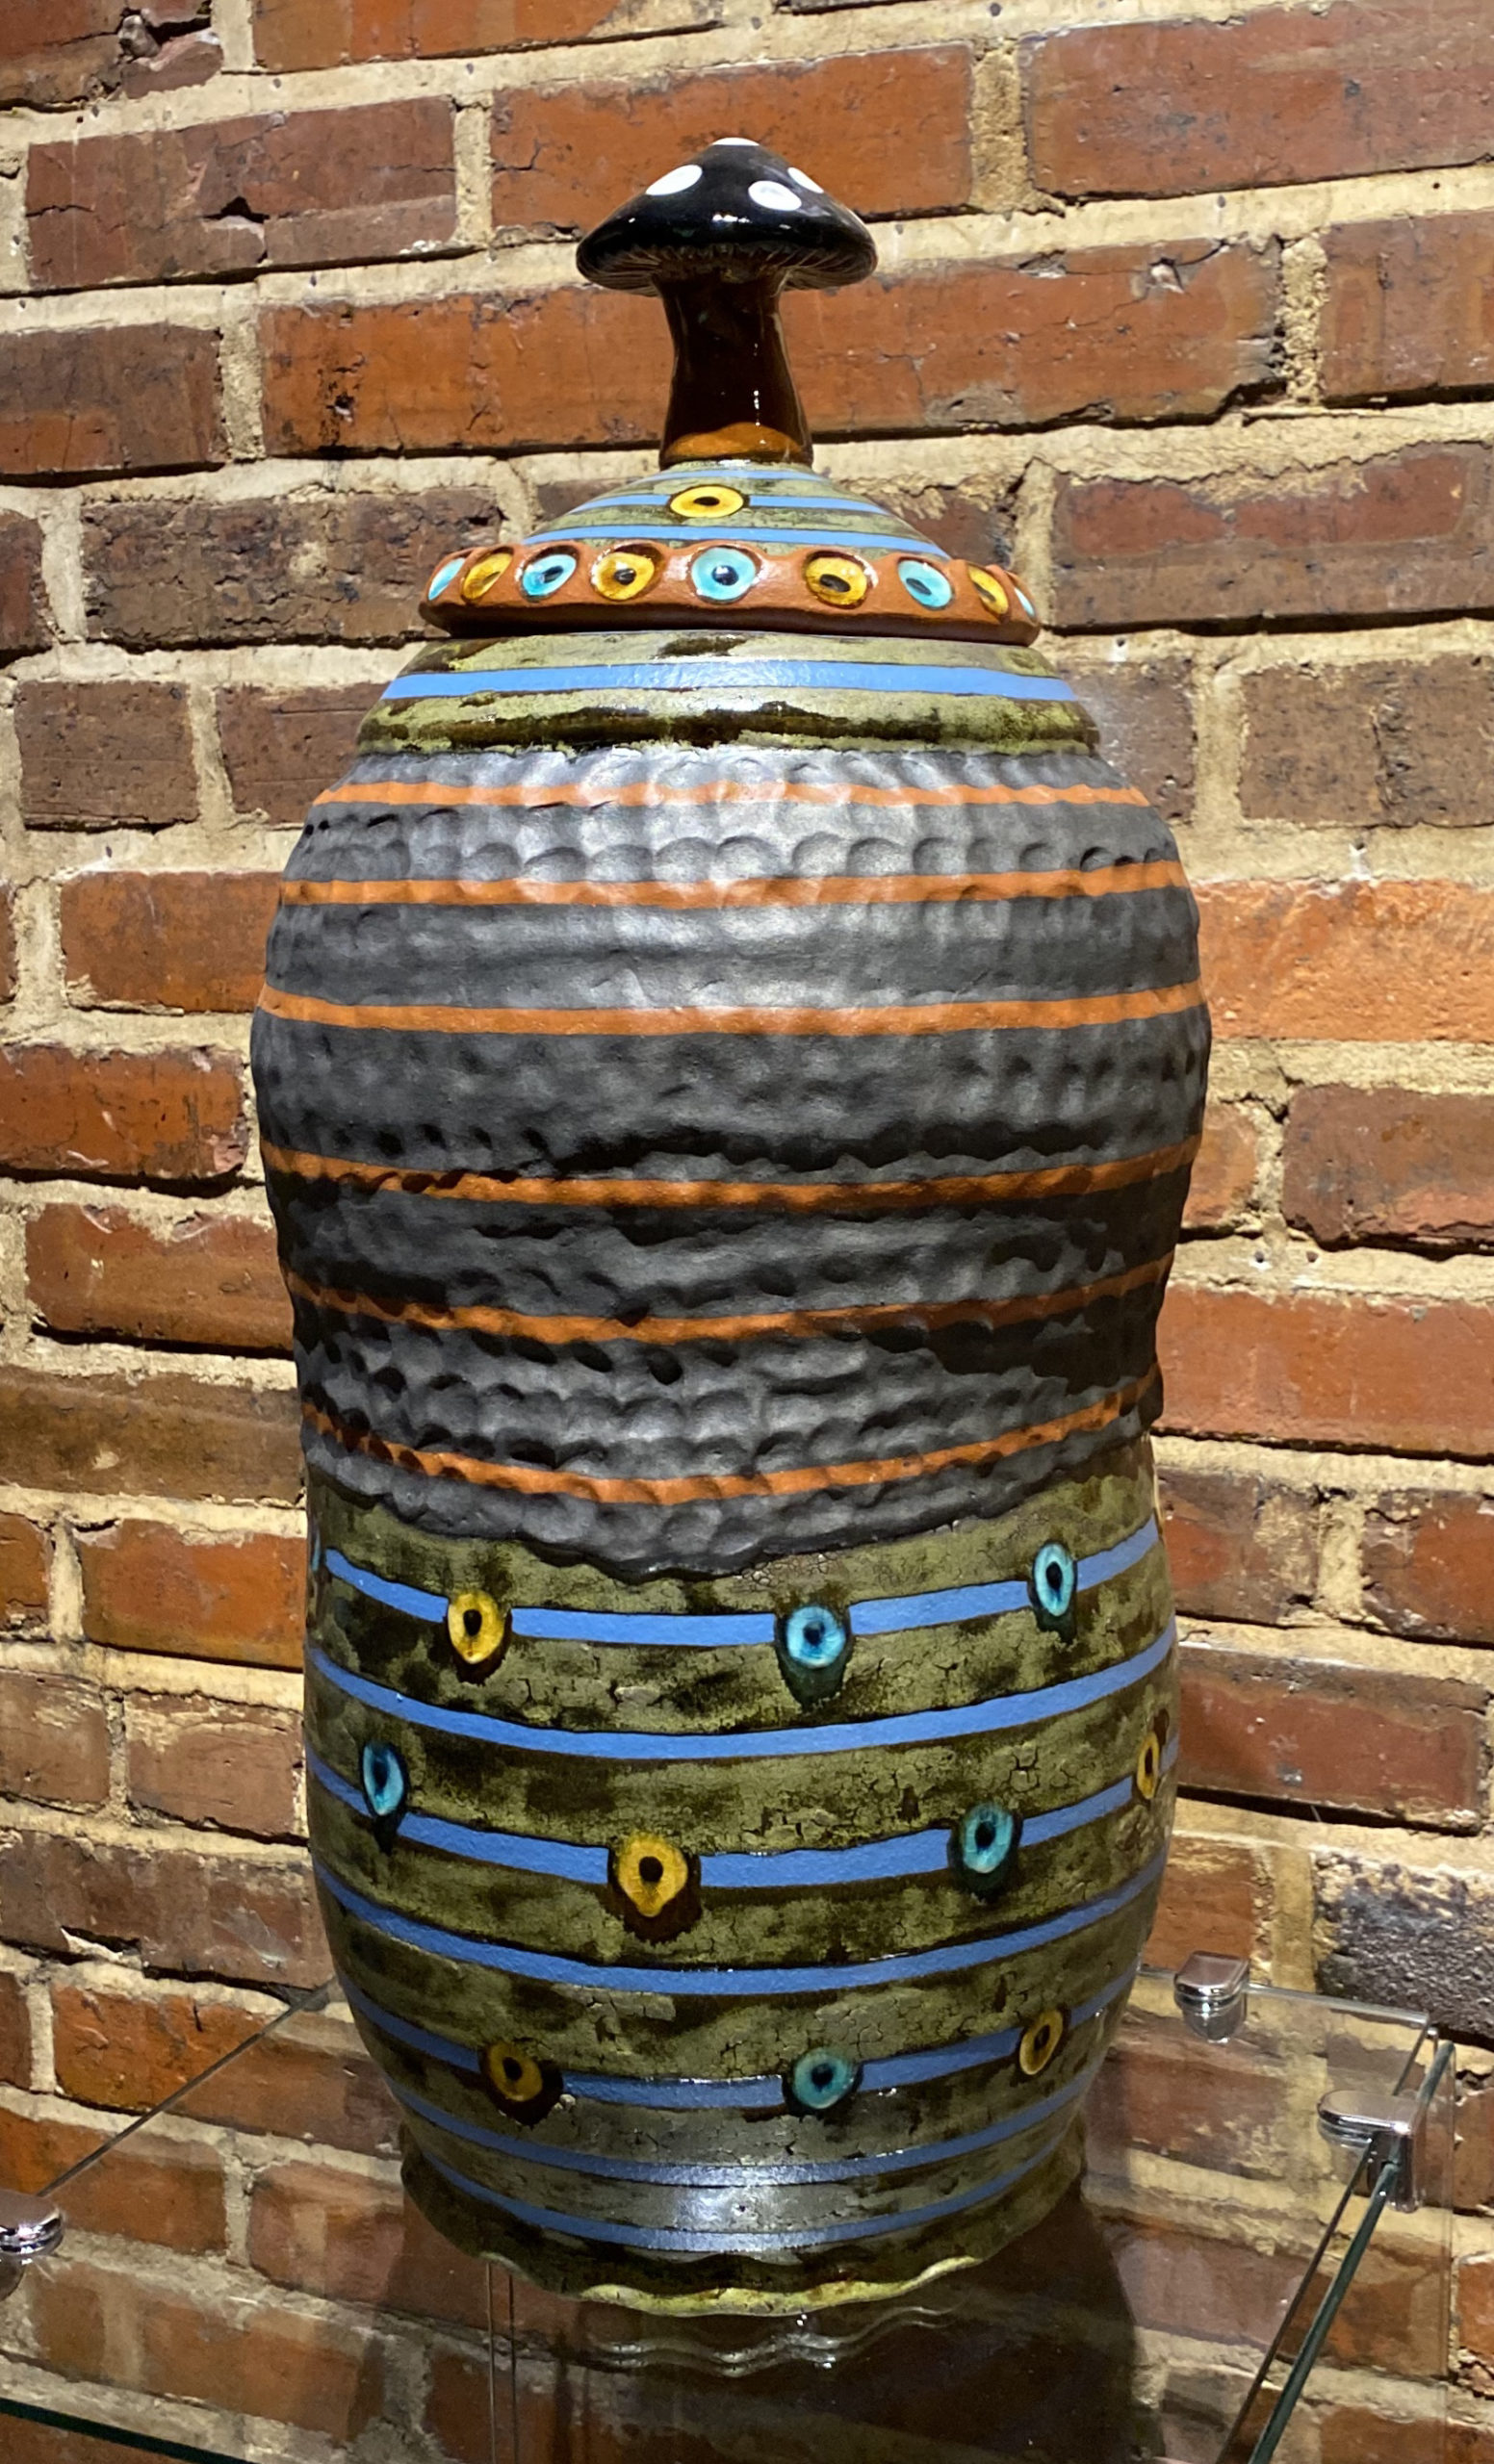 Stump Gall Rice Jar by Ronan Peterson, red earthenware, 24 x 8 x 10 at Craven Allen Gallery 2000